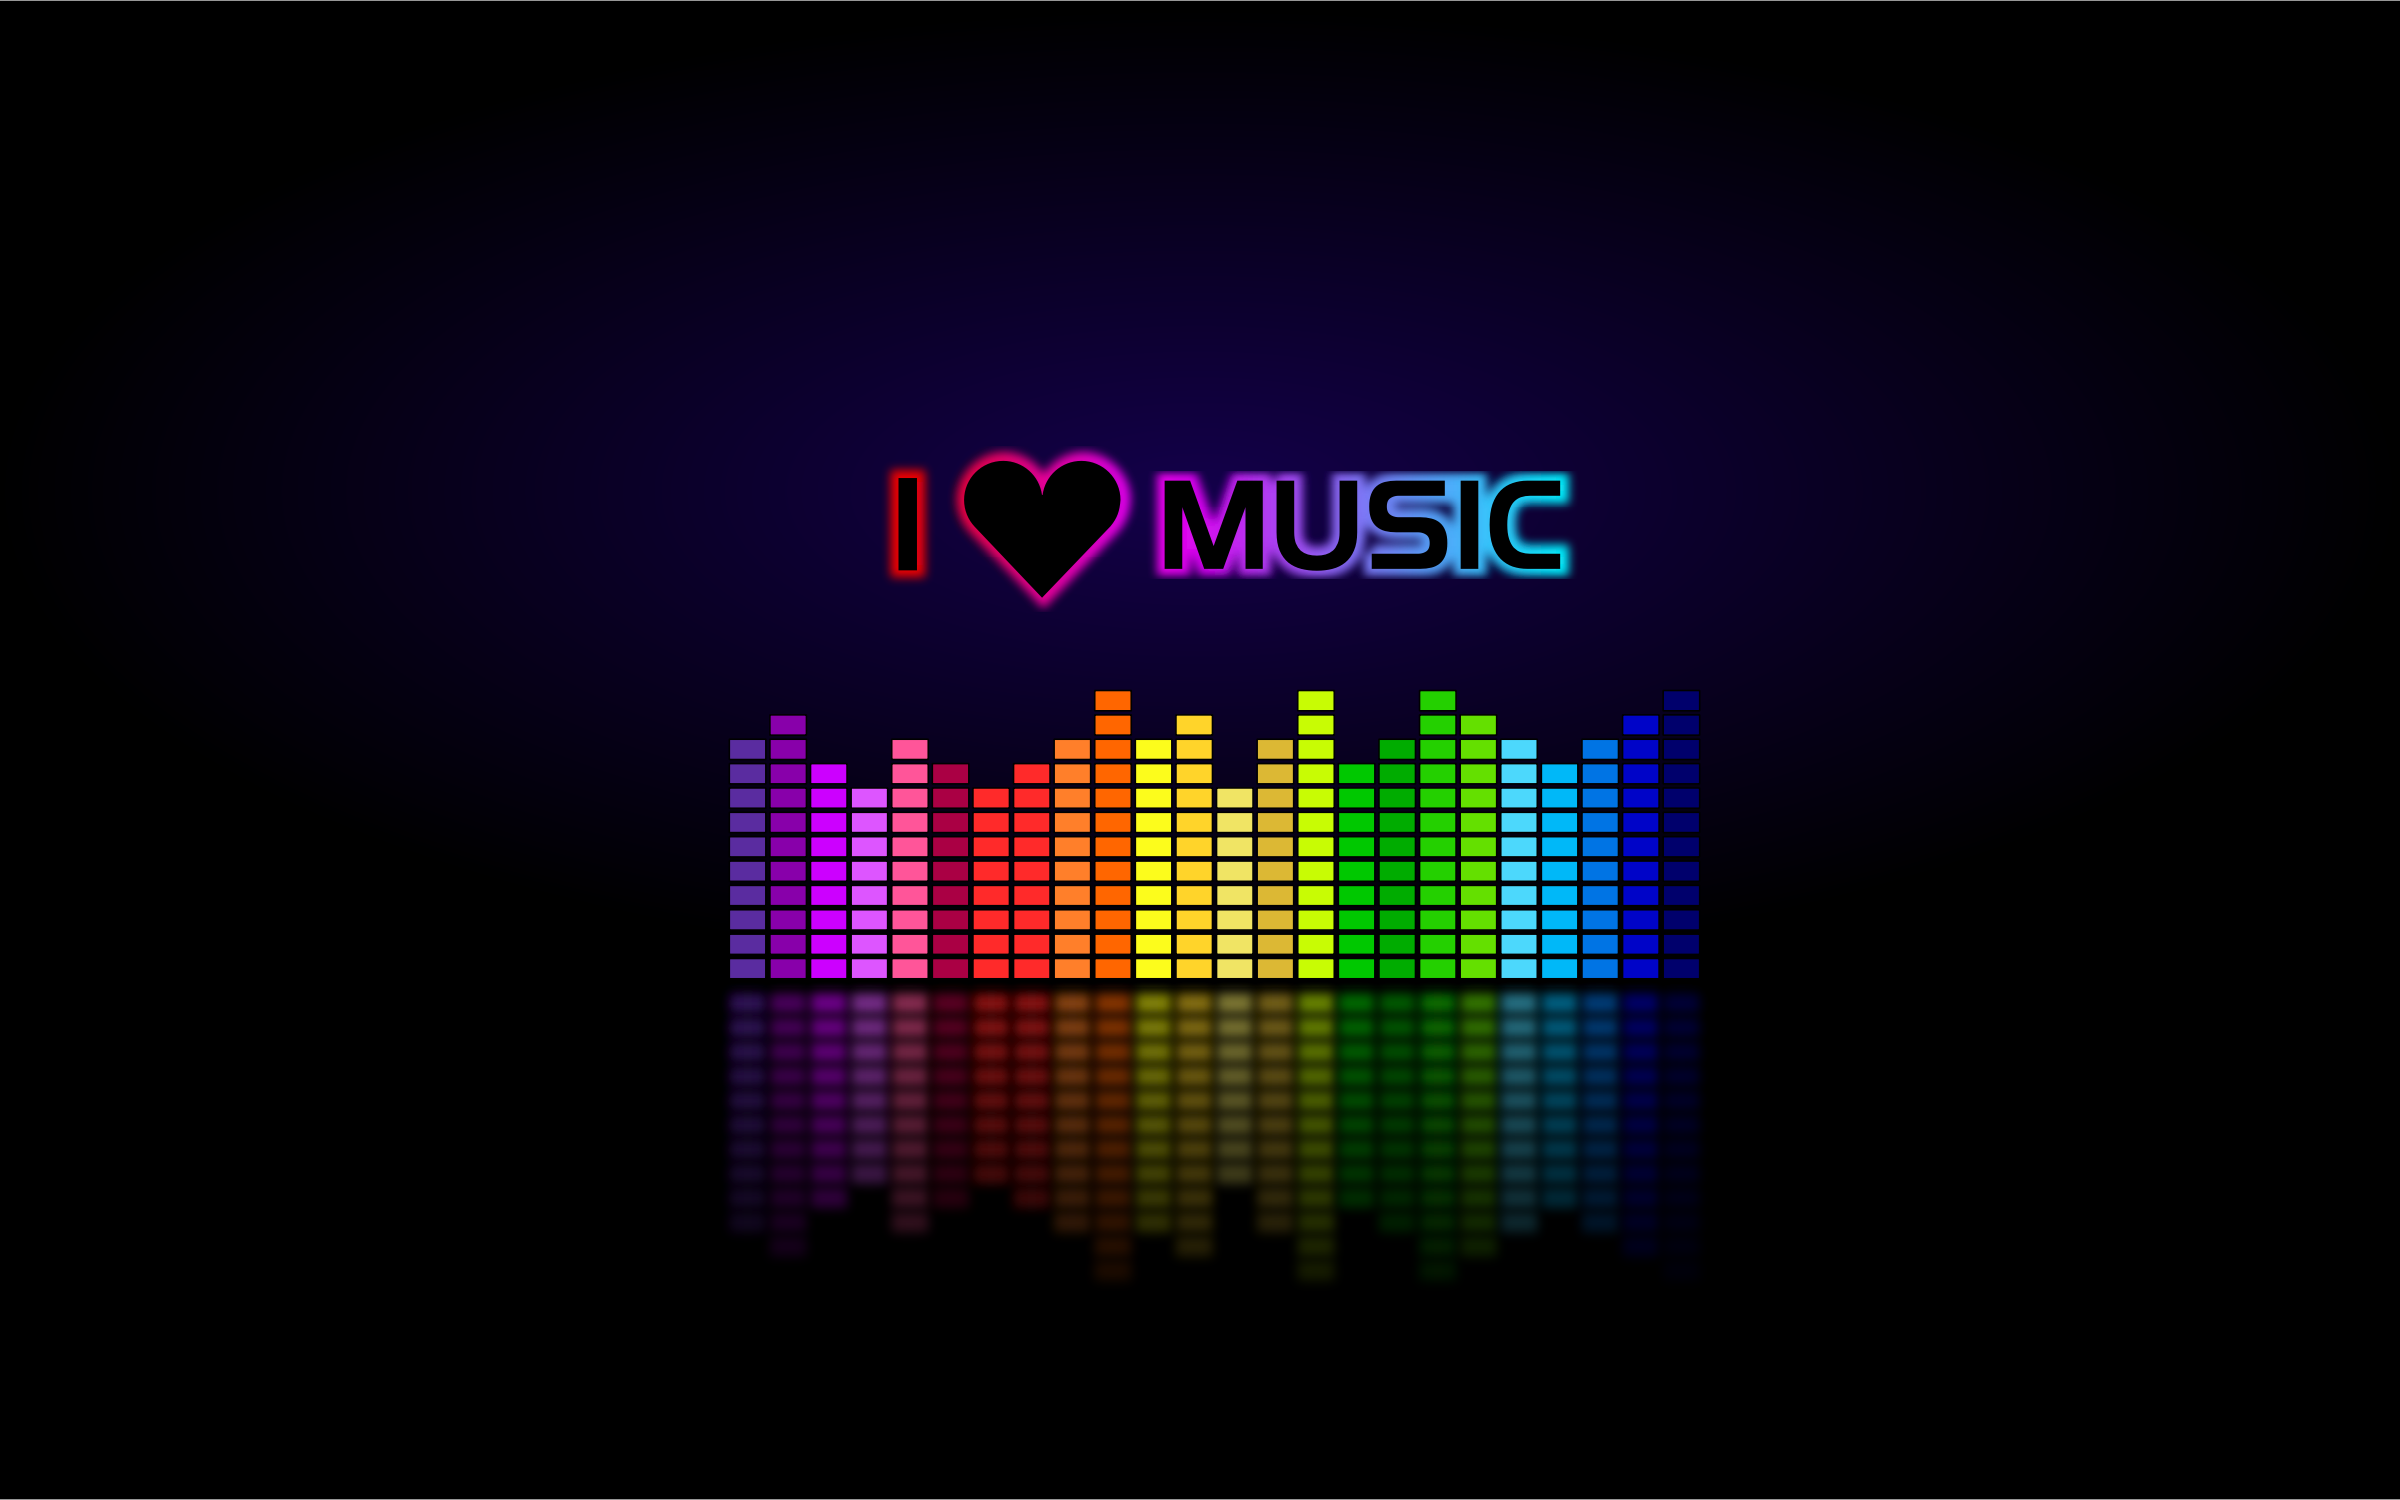 Category Music Gallery Wallpaper of 5 MoshLab